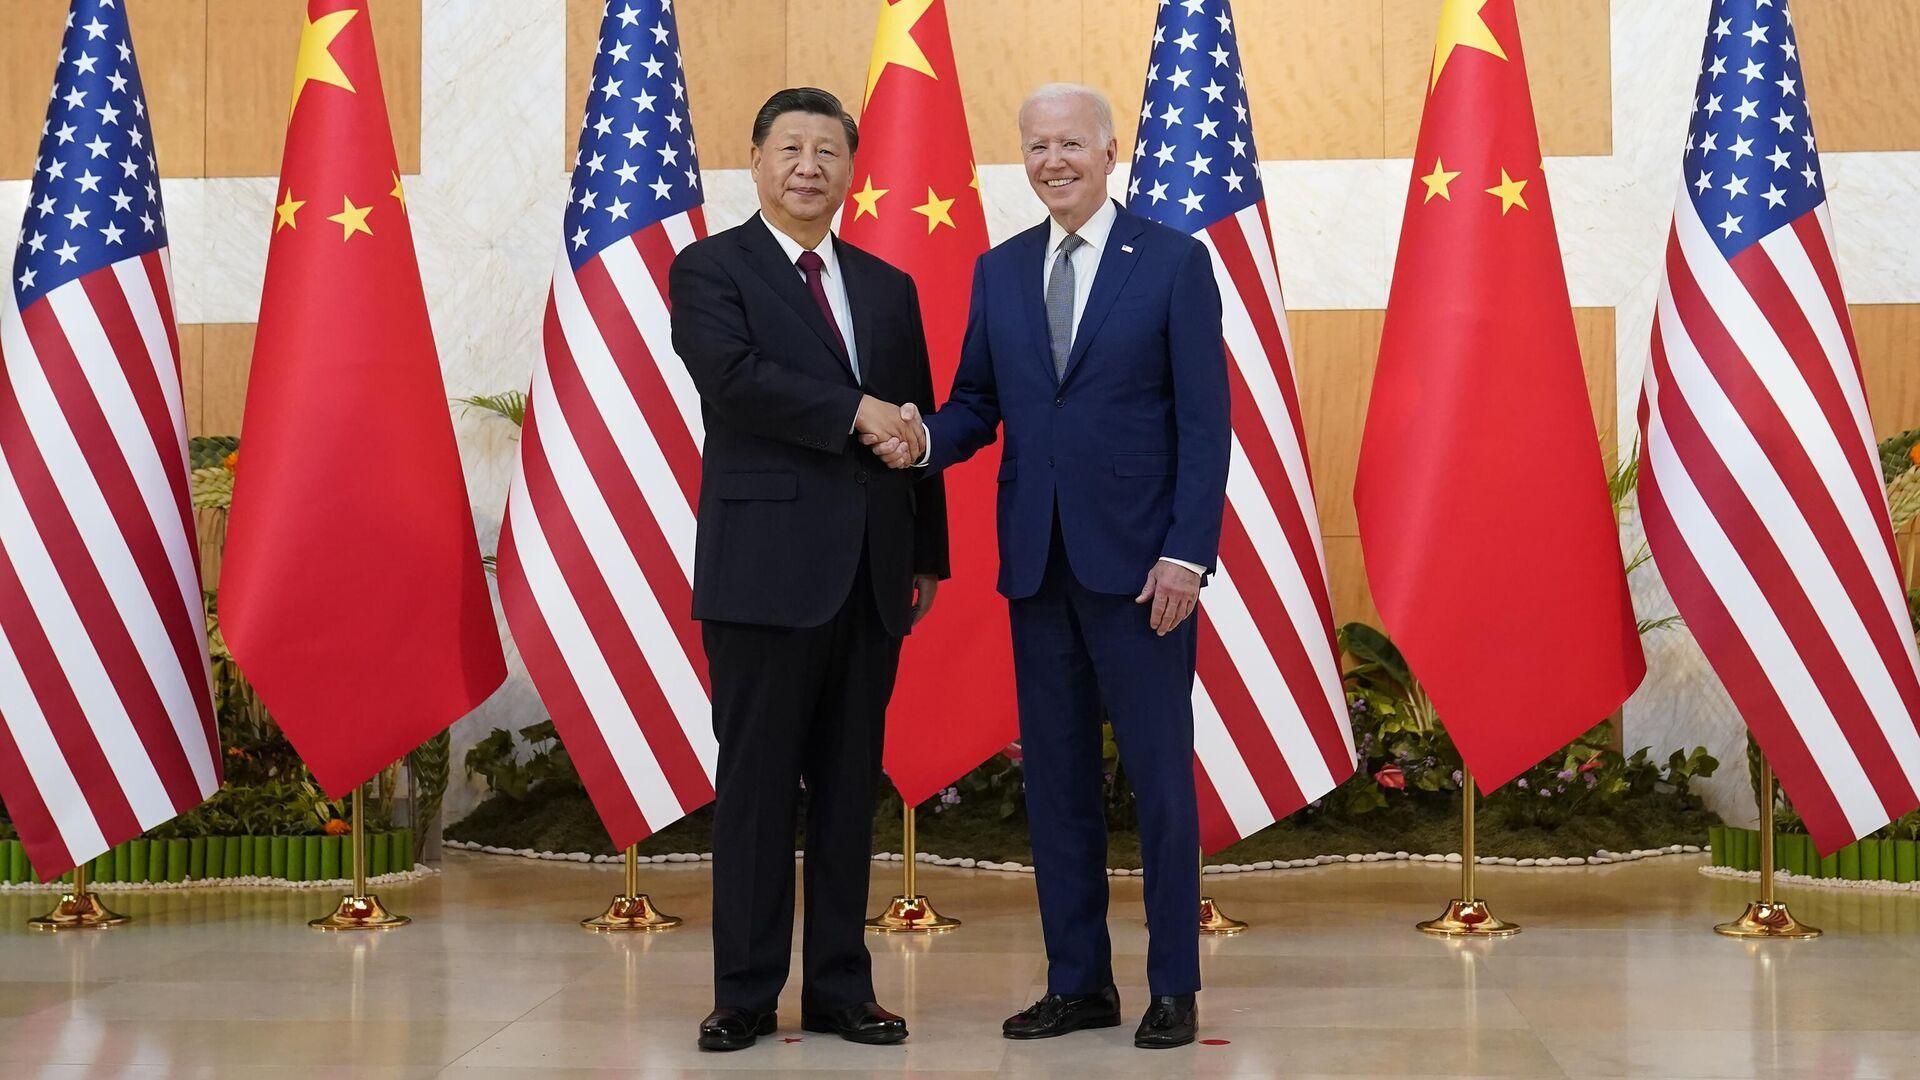 Biden and Xi Jinping to hold a phone conversation soon